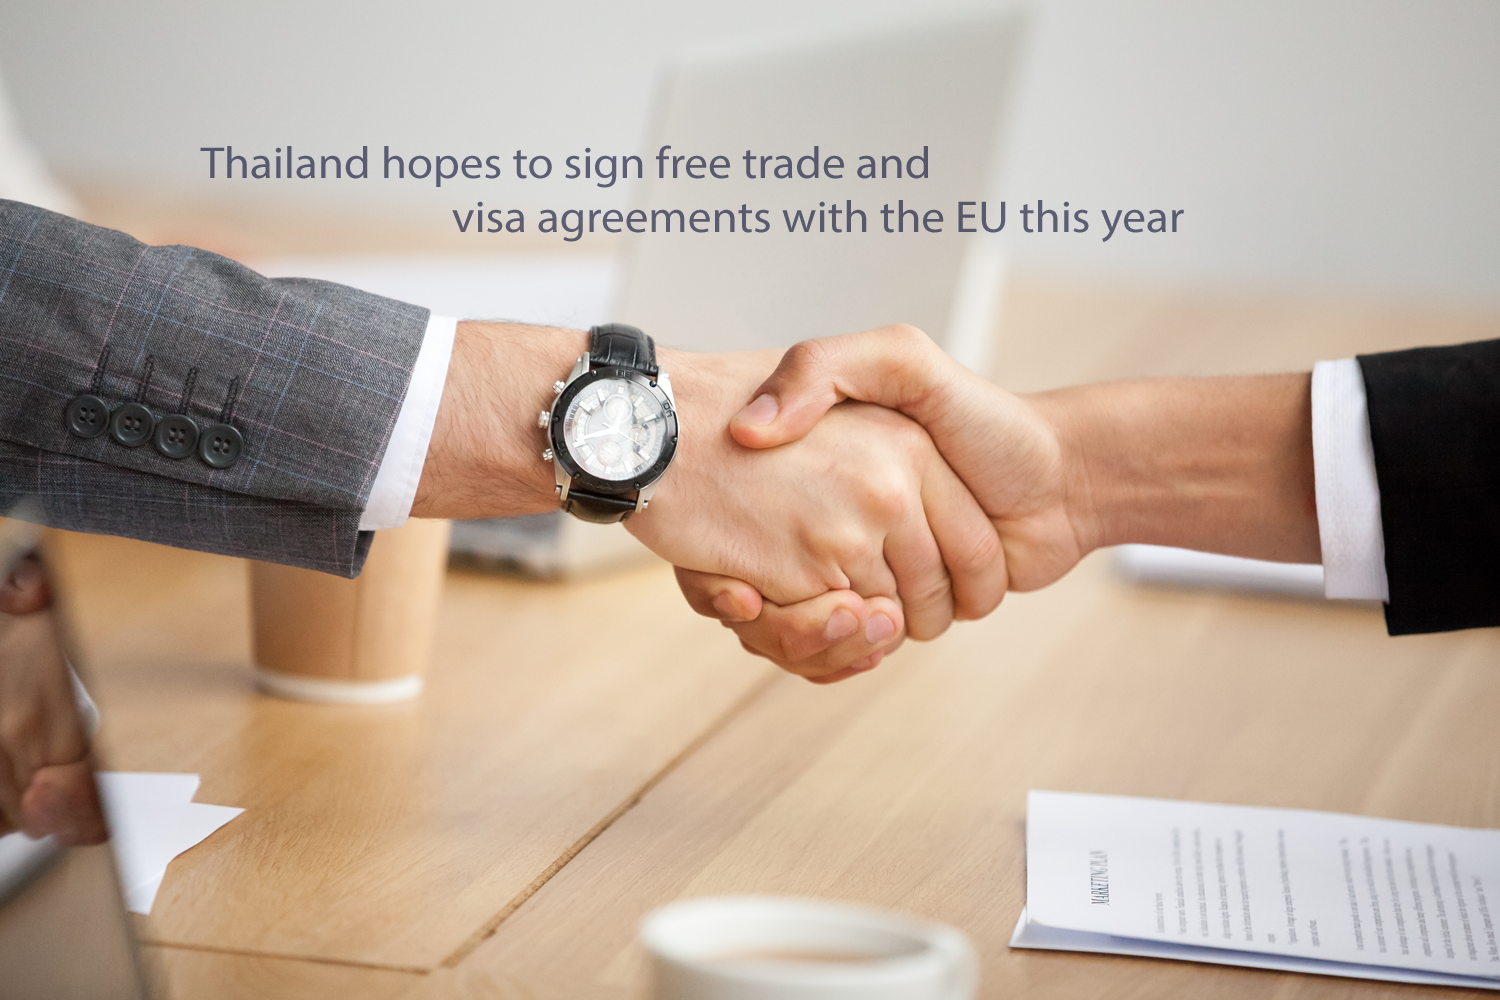 Thailand hopes to sign free trade and visa agreements with the EU this year.